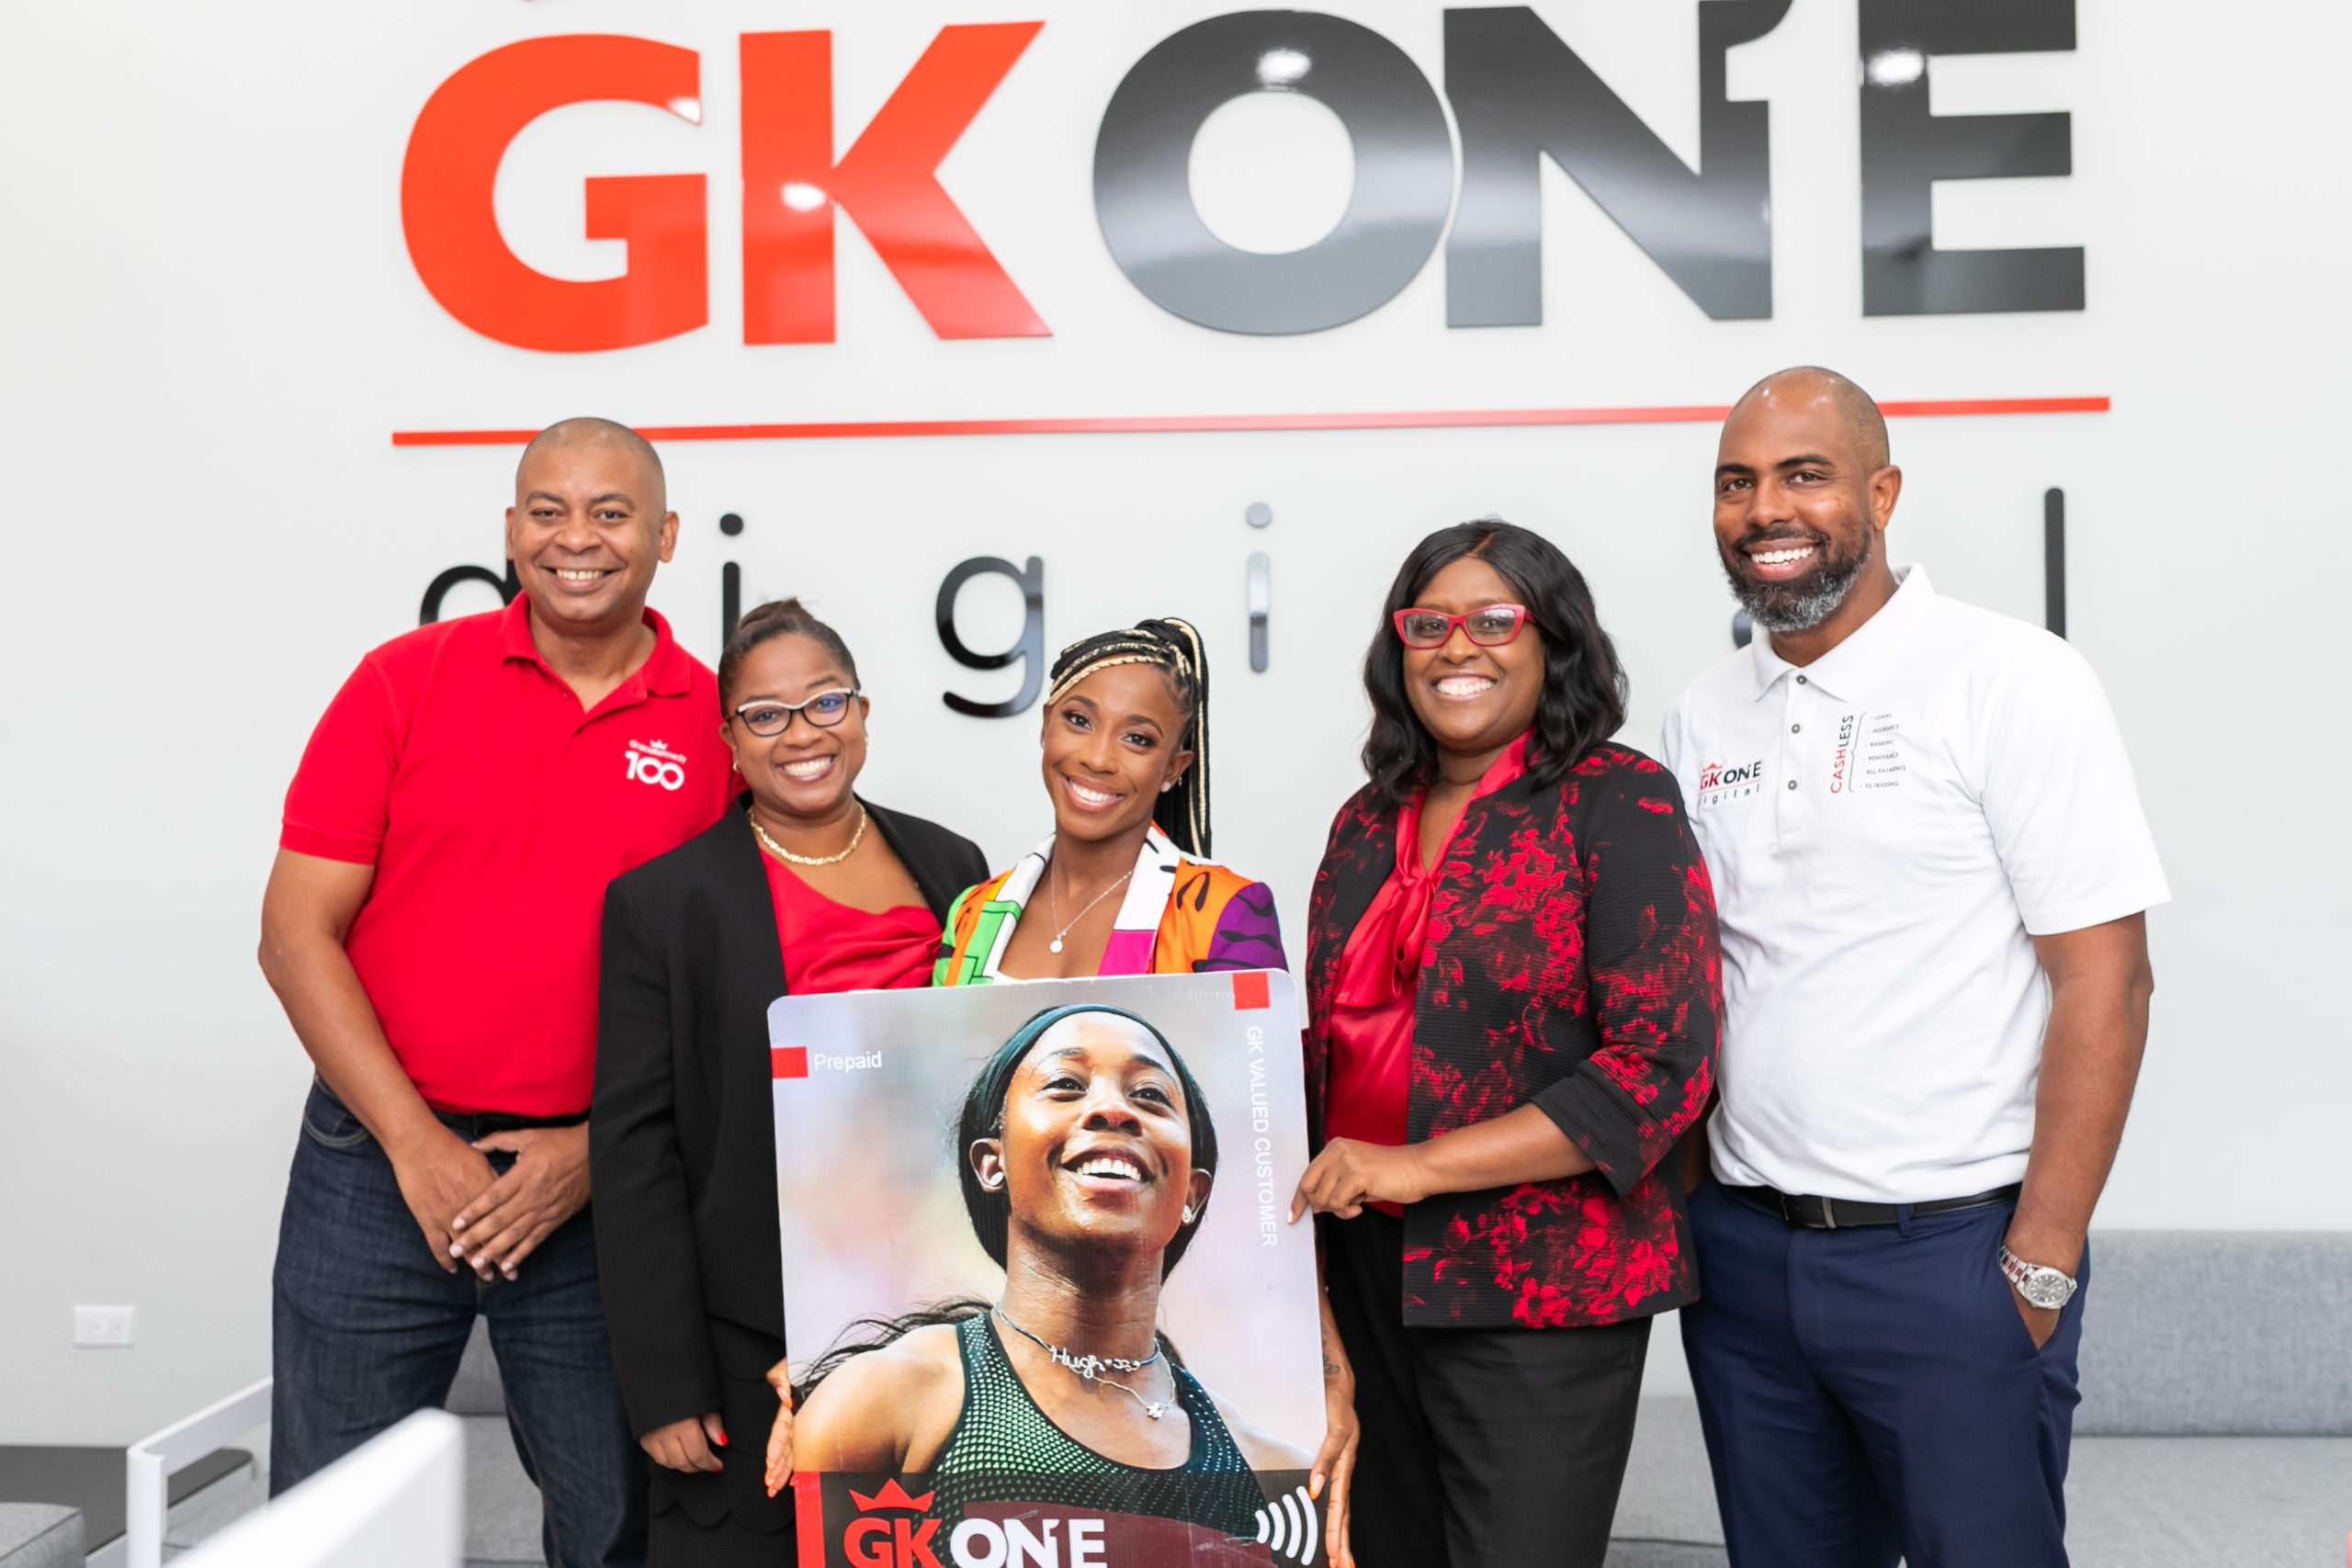 SFP with Team: GraceKennedy Brand Ambassador and face of the GK ONE pre-paid Visa Debit Card, Olympian and World Champion Shelly–Ann Fraser – Pryce posed with company executives at the GK ONE digital store at GraceKennedy’s Corporate headquarters. Fraser-Pryce is flanked by l-r Rickardo Ebanks, Chief Digital Officer; Annalise Harewood, Regional Manager, Digital Operations, GraceKennedy Money Services; Margaret Campbell, Chief Operating Officer, GraceKennedy Money Service; Steven Whittingham, Deputy CEO, GraceKennedy Financial Group.